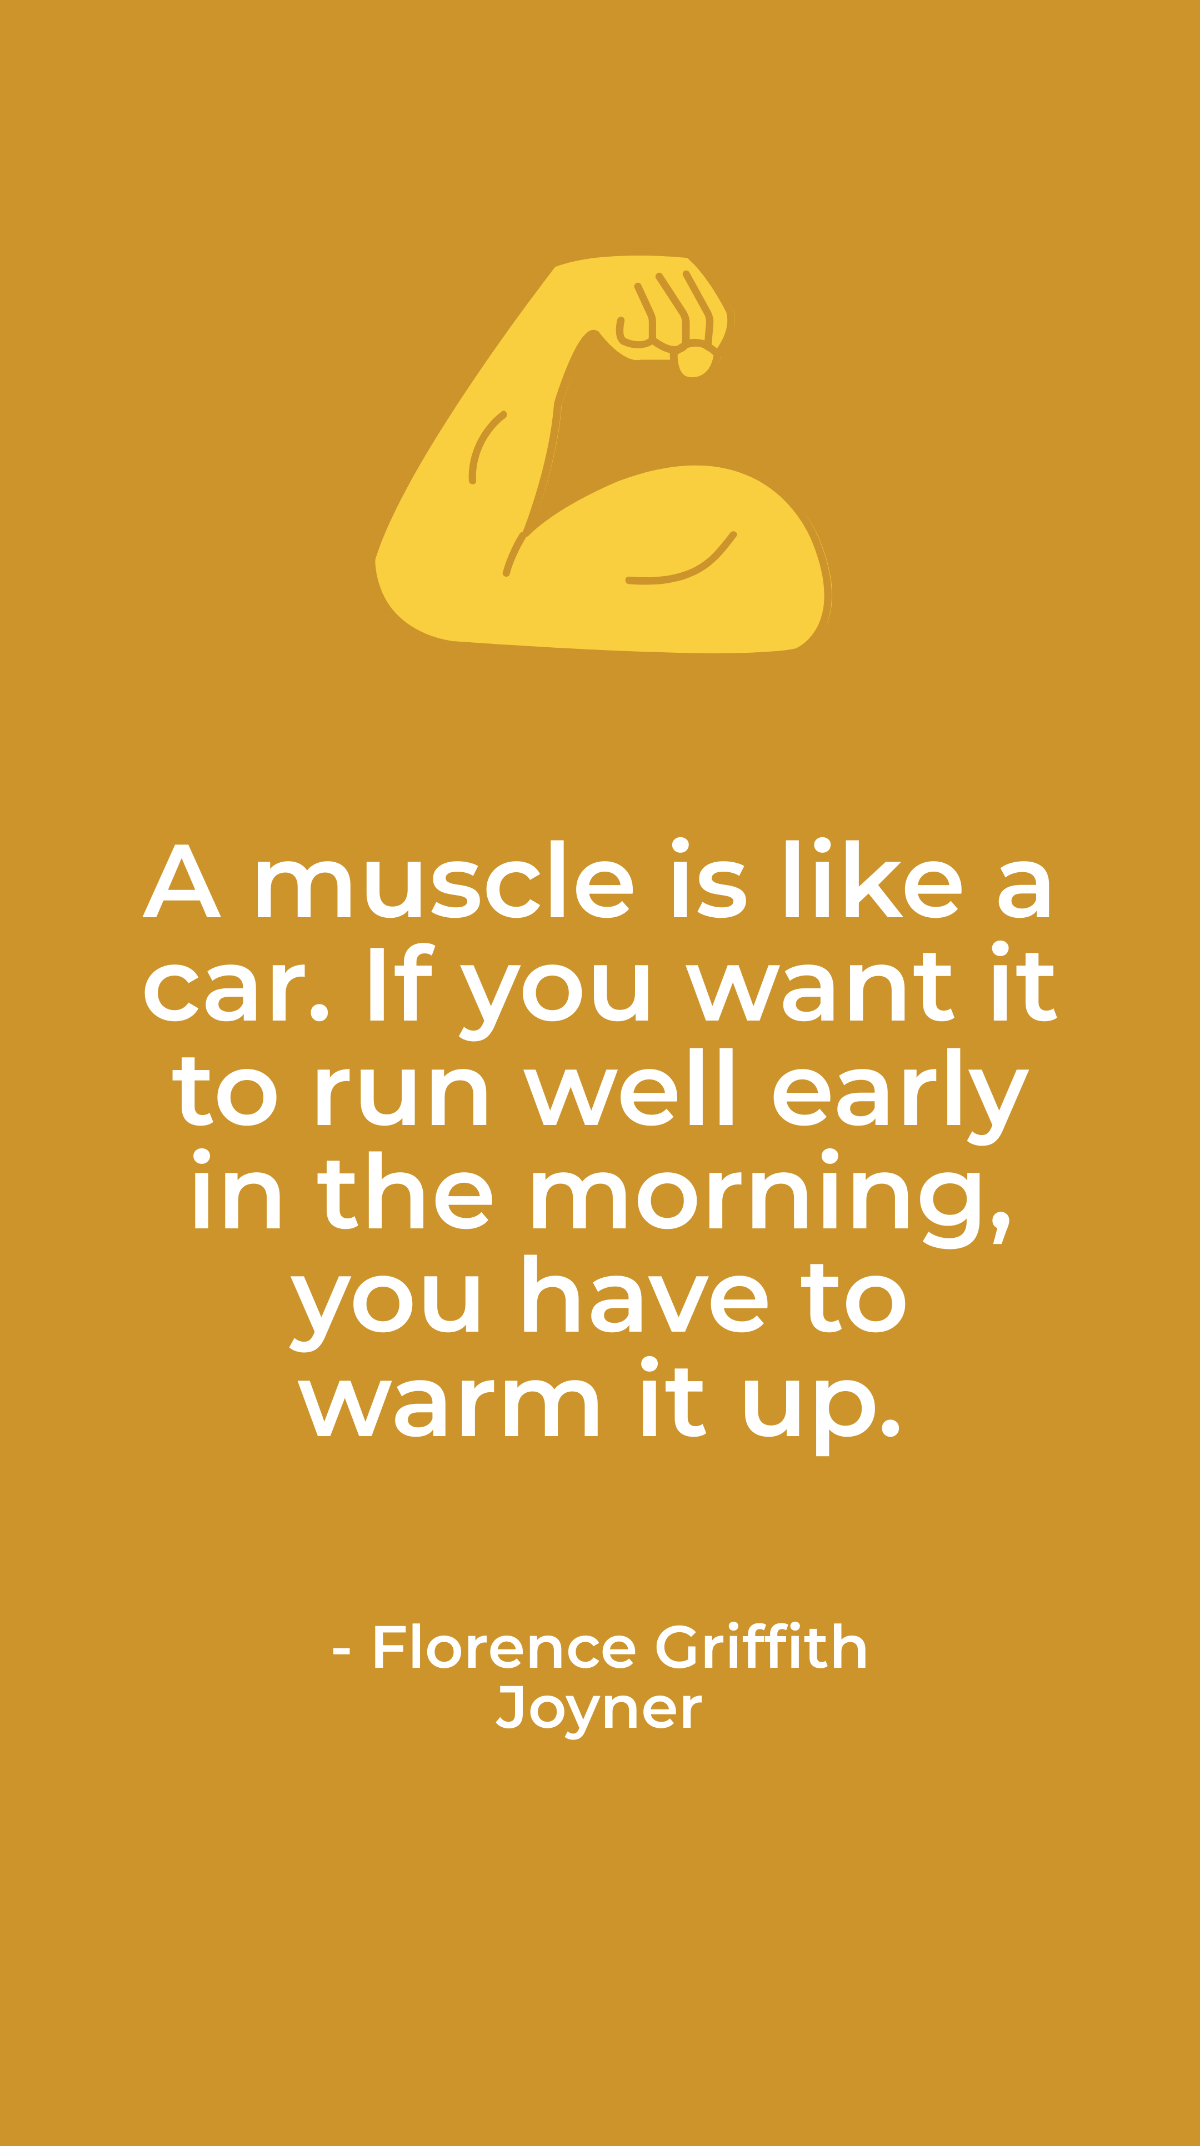 Free Florence Griffith Joyner - A muscle is like a car. If you want it to run well early in the morning, you have to warm it up. Template